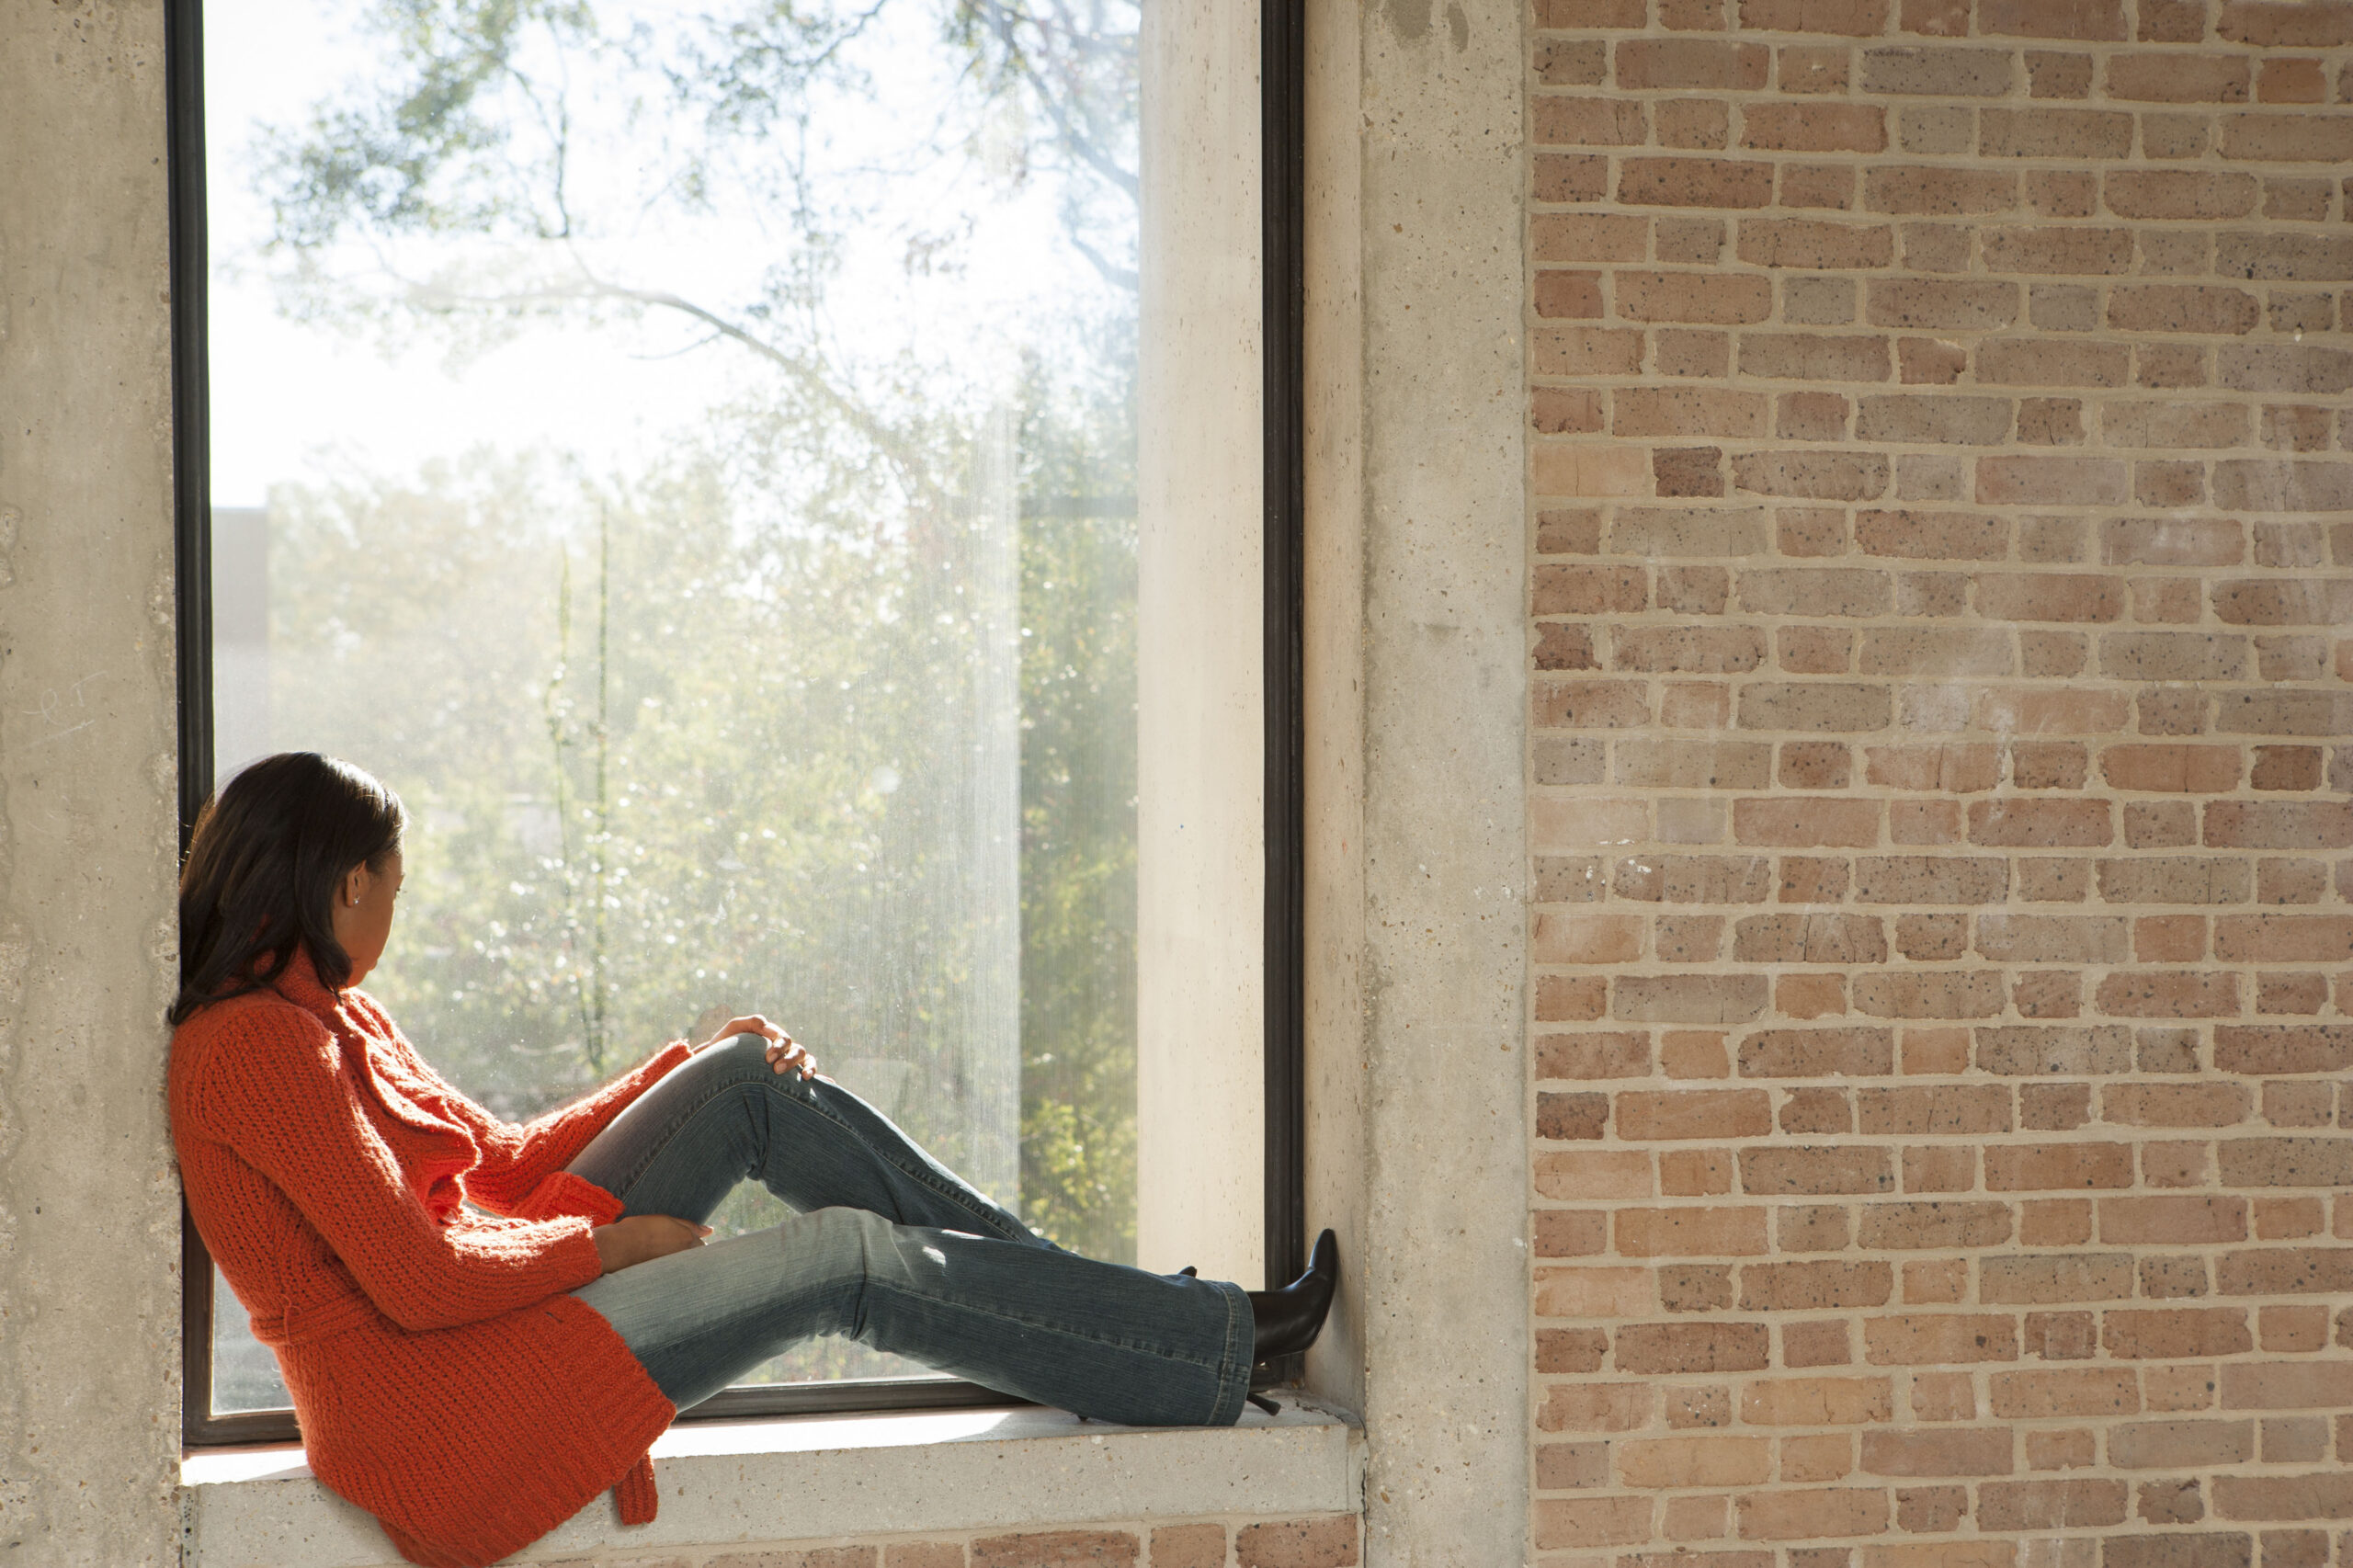 College student in classroom sitting on window sill.